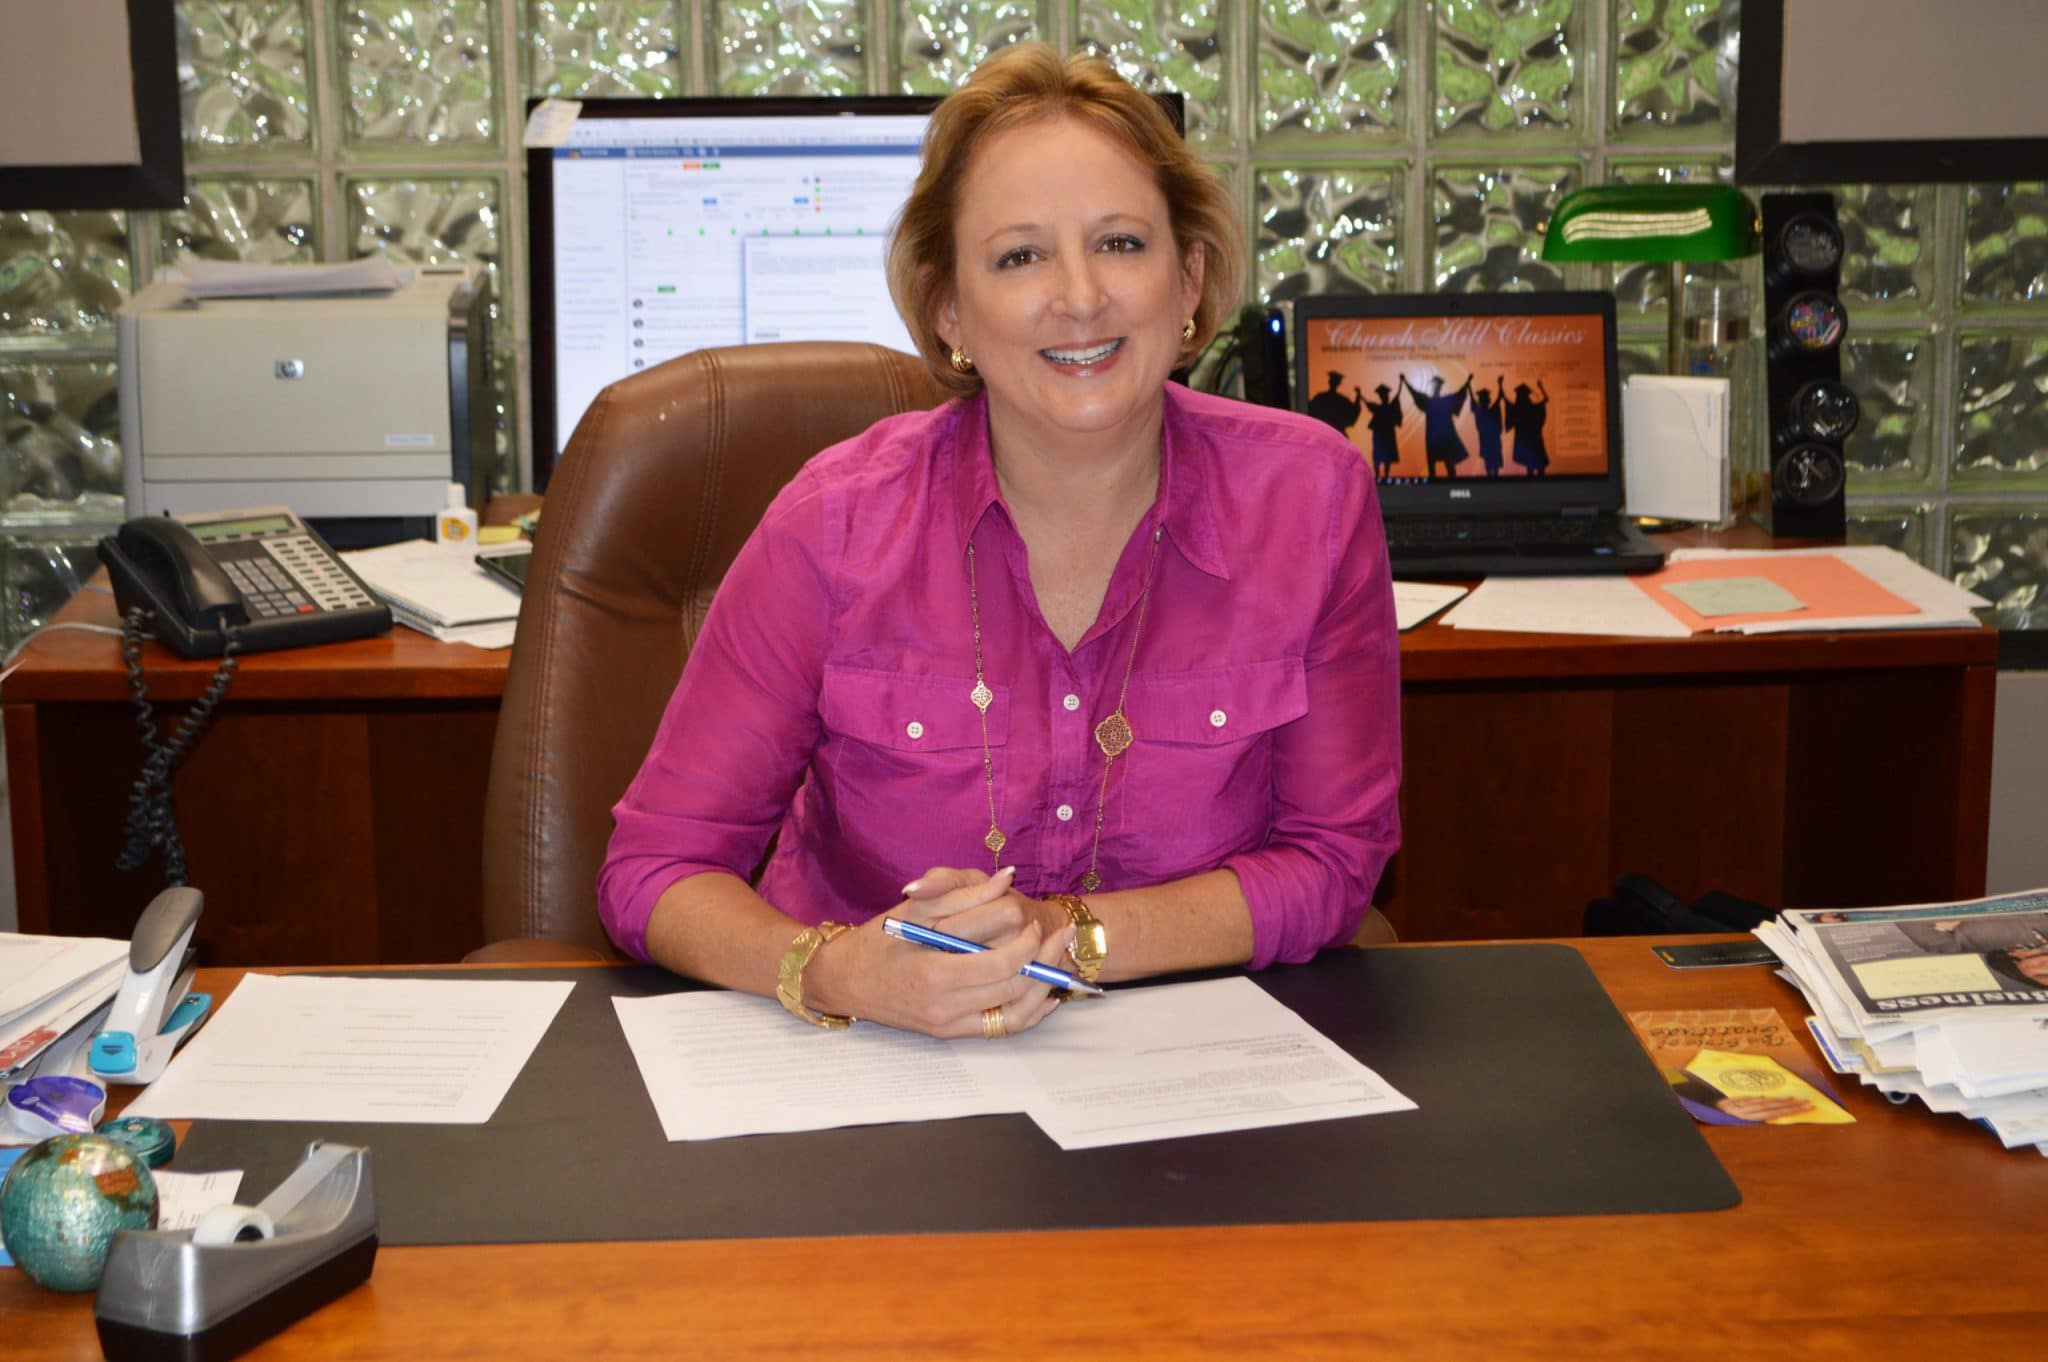 ceo lucie voves sits at desk in pink shirt